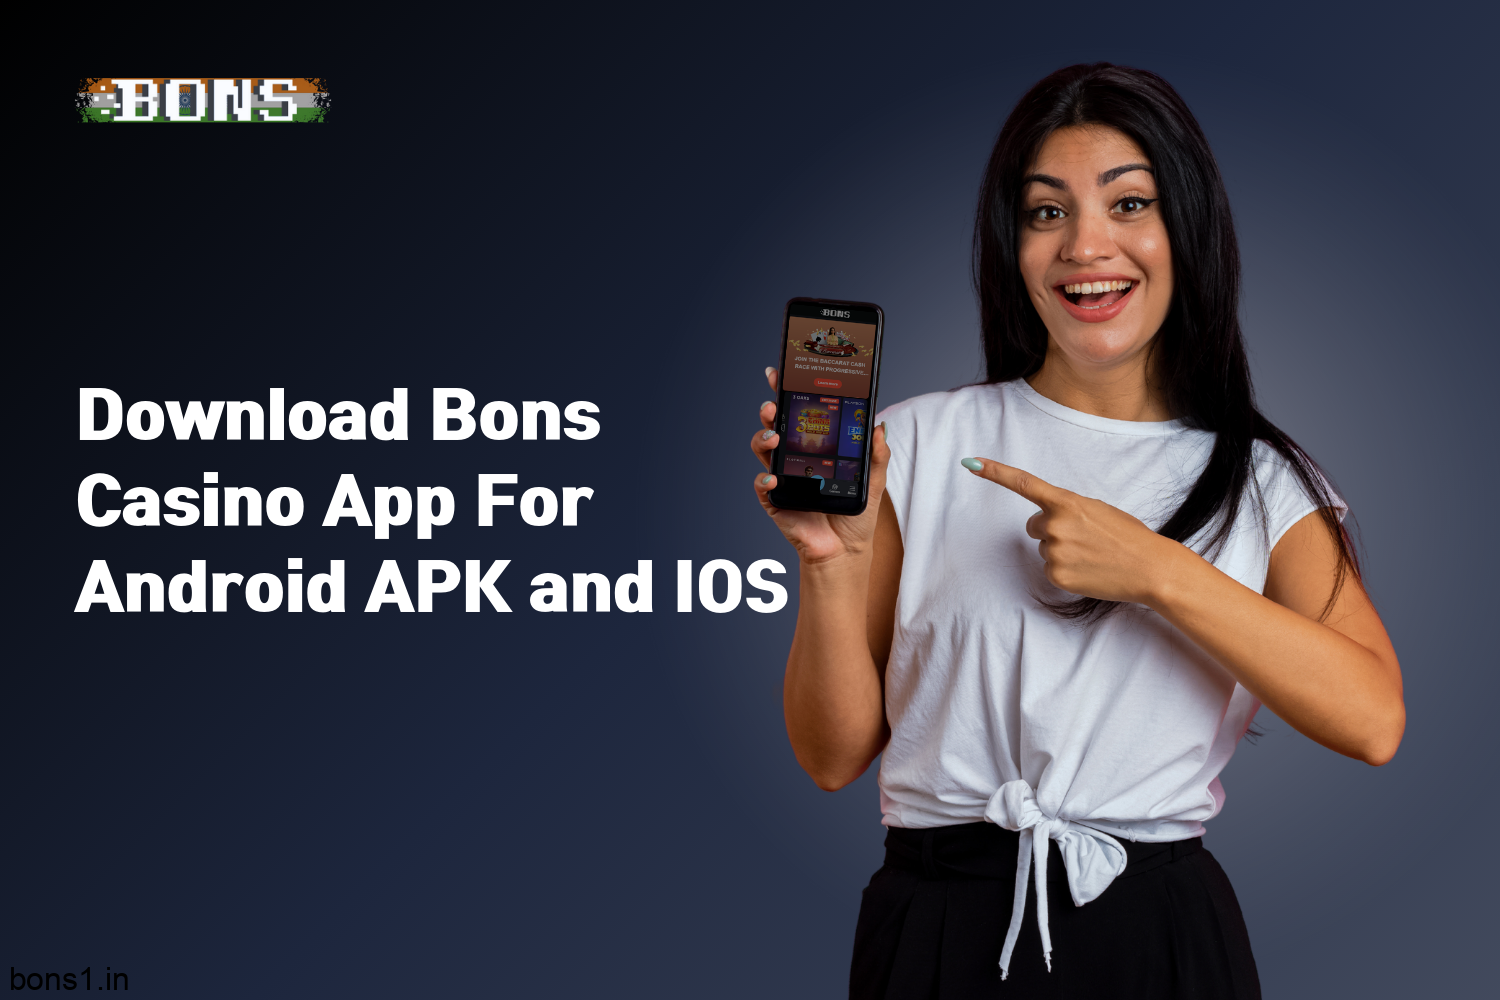 Users from India can download the bons casino app for android apk and ios